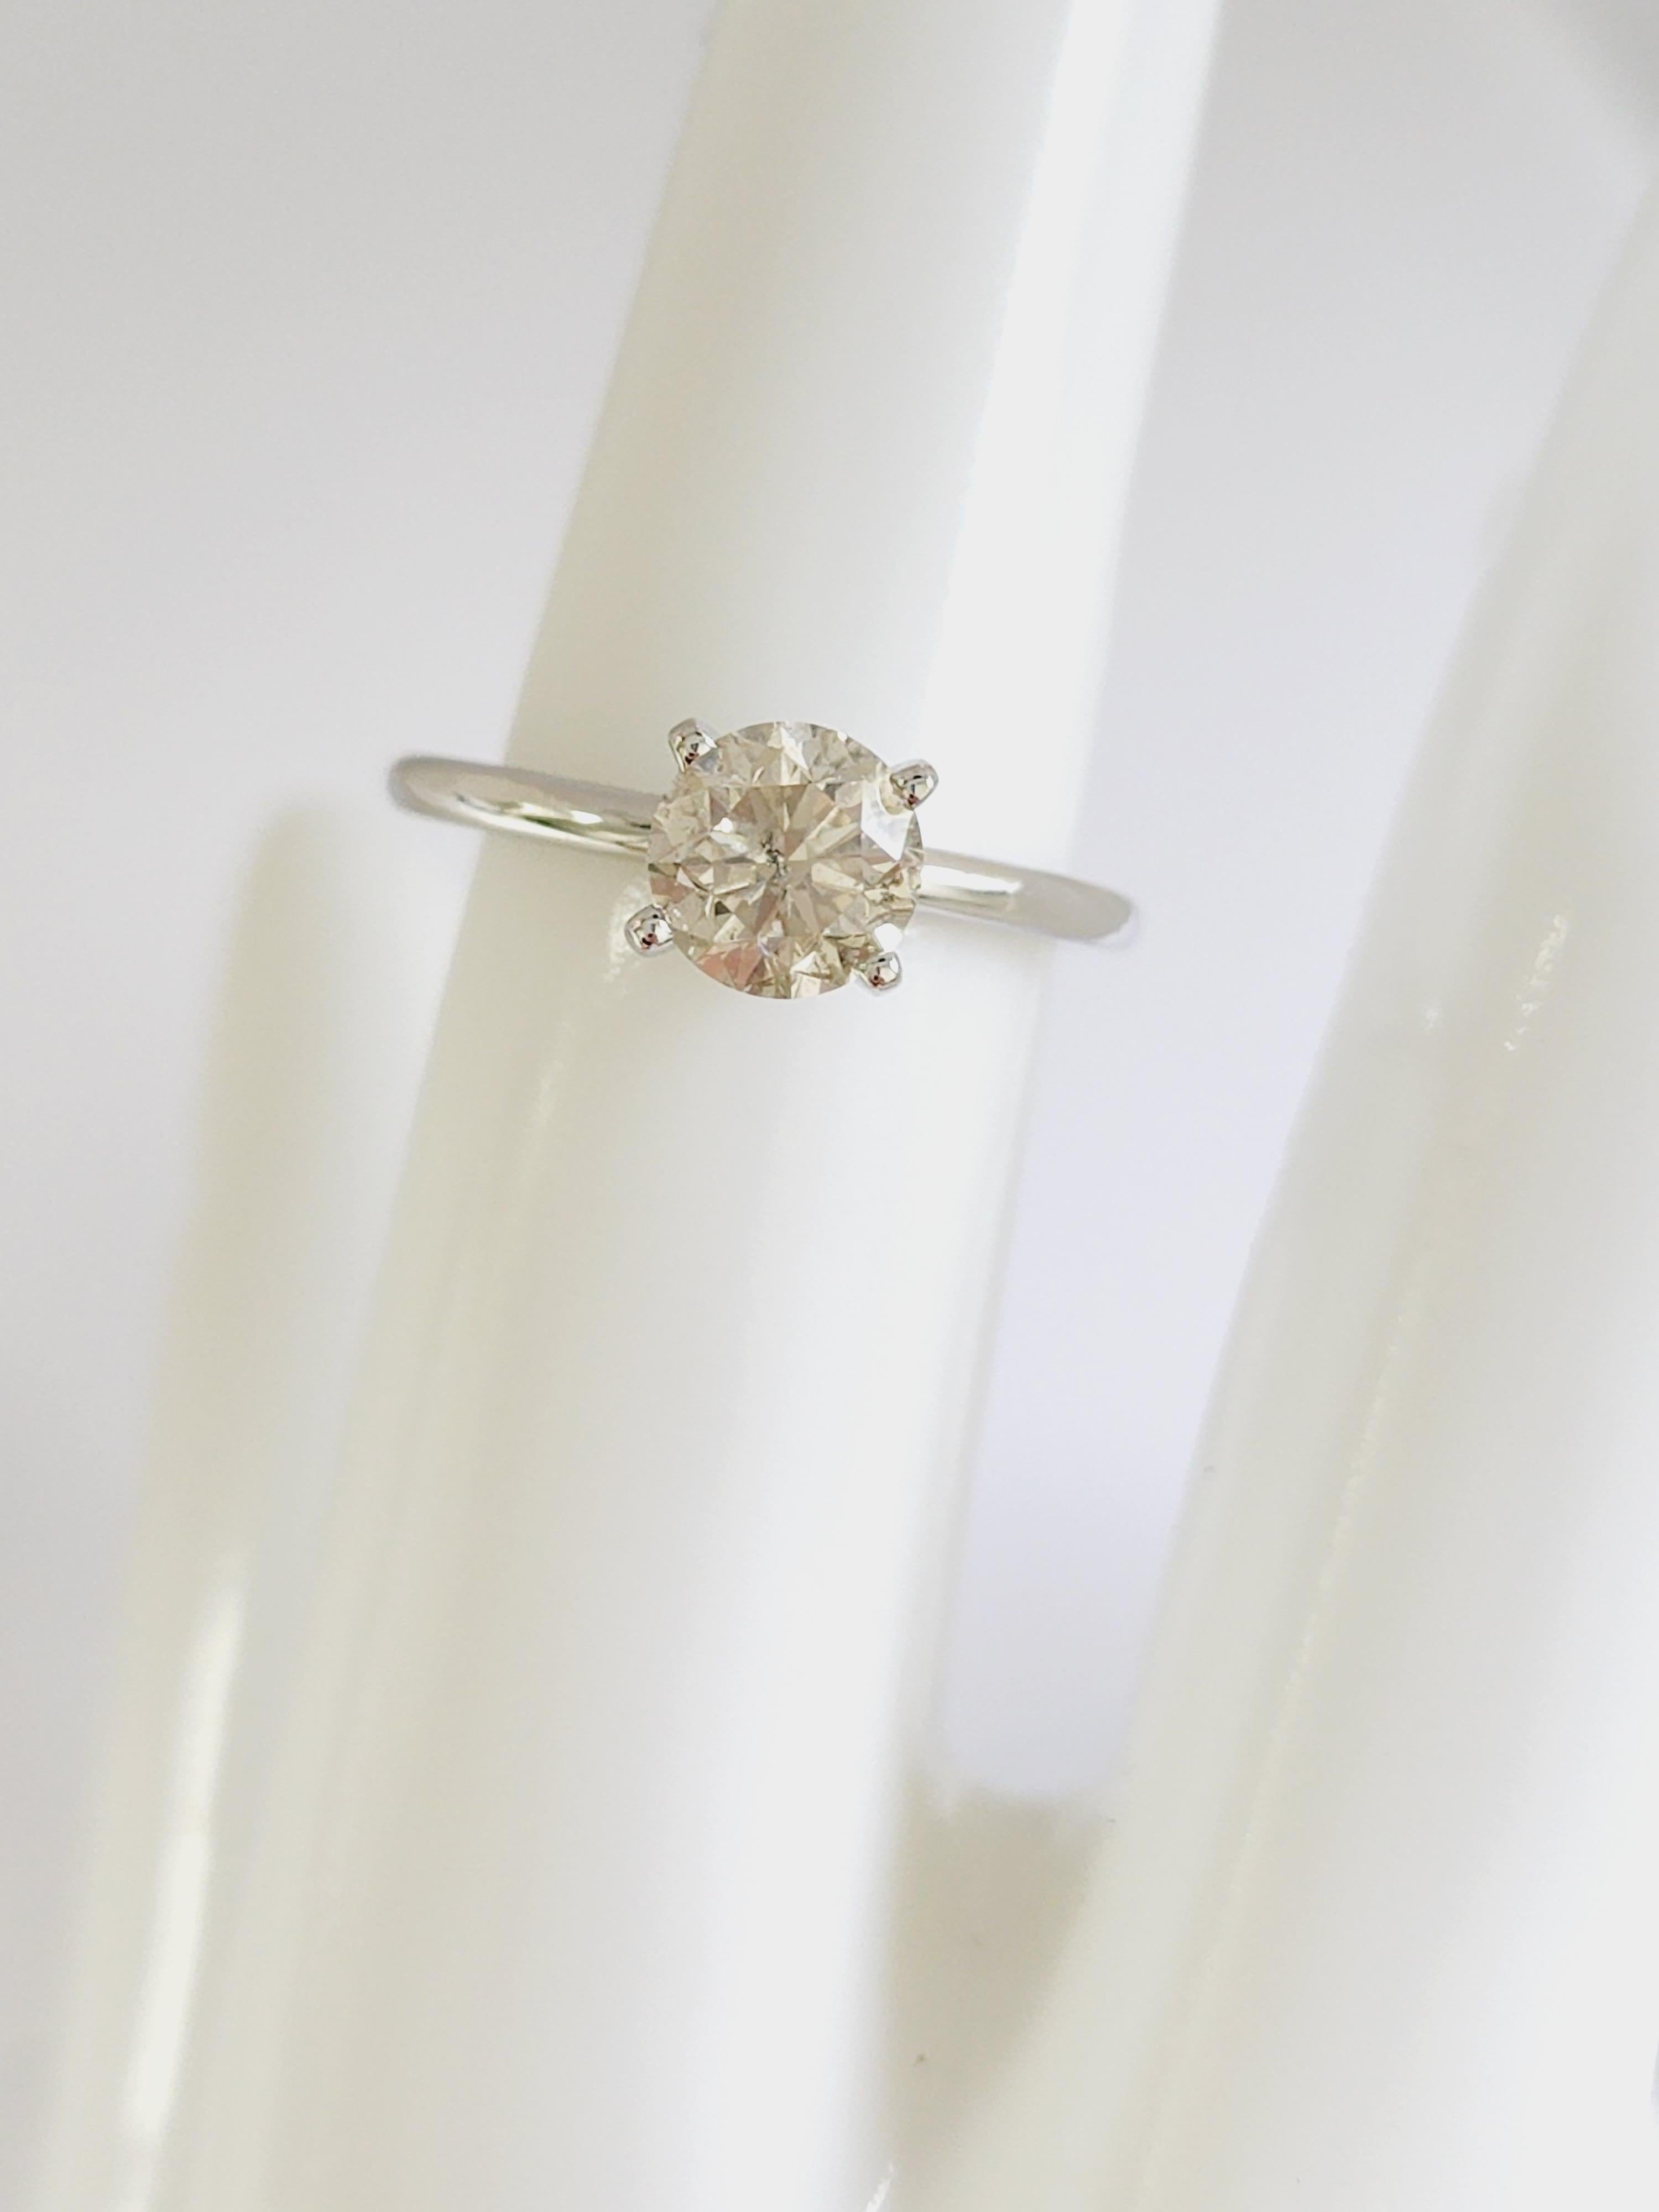 GIA 1.17 Carat Round Cut Diamond White Gold Solitaire Ring 14 Karat In New Condition For Sale In Great Neck, NY